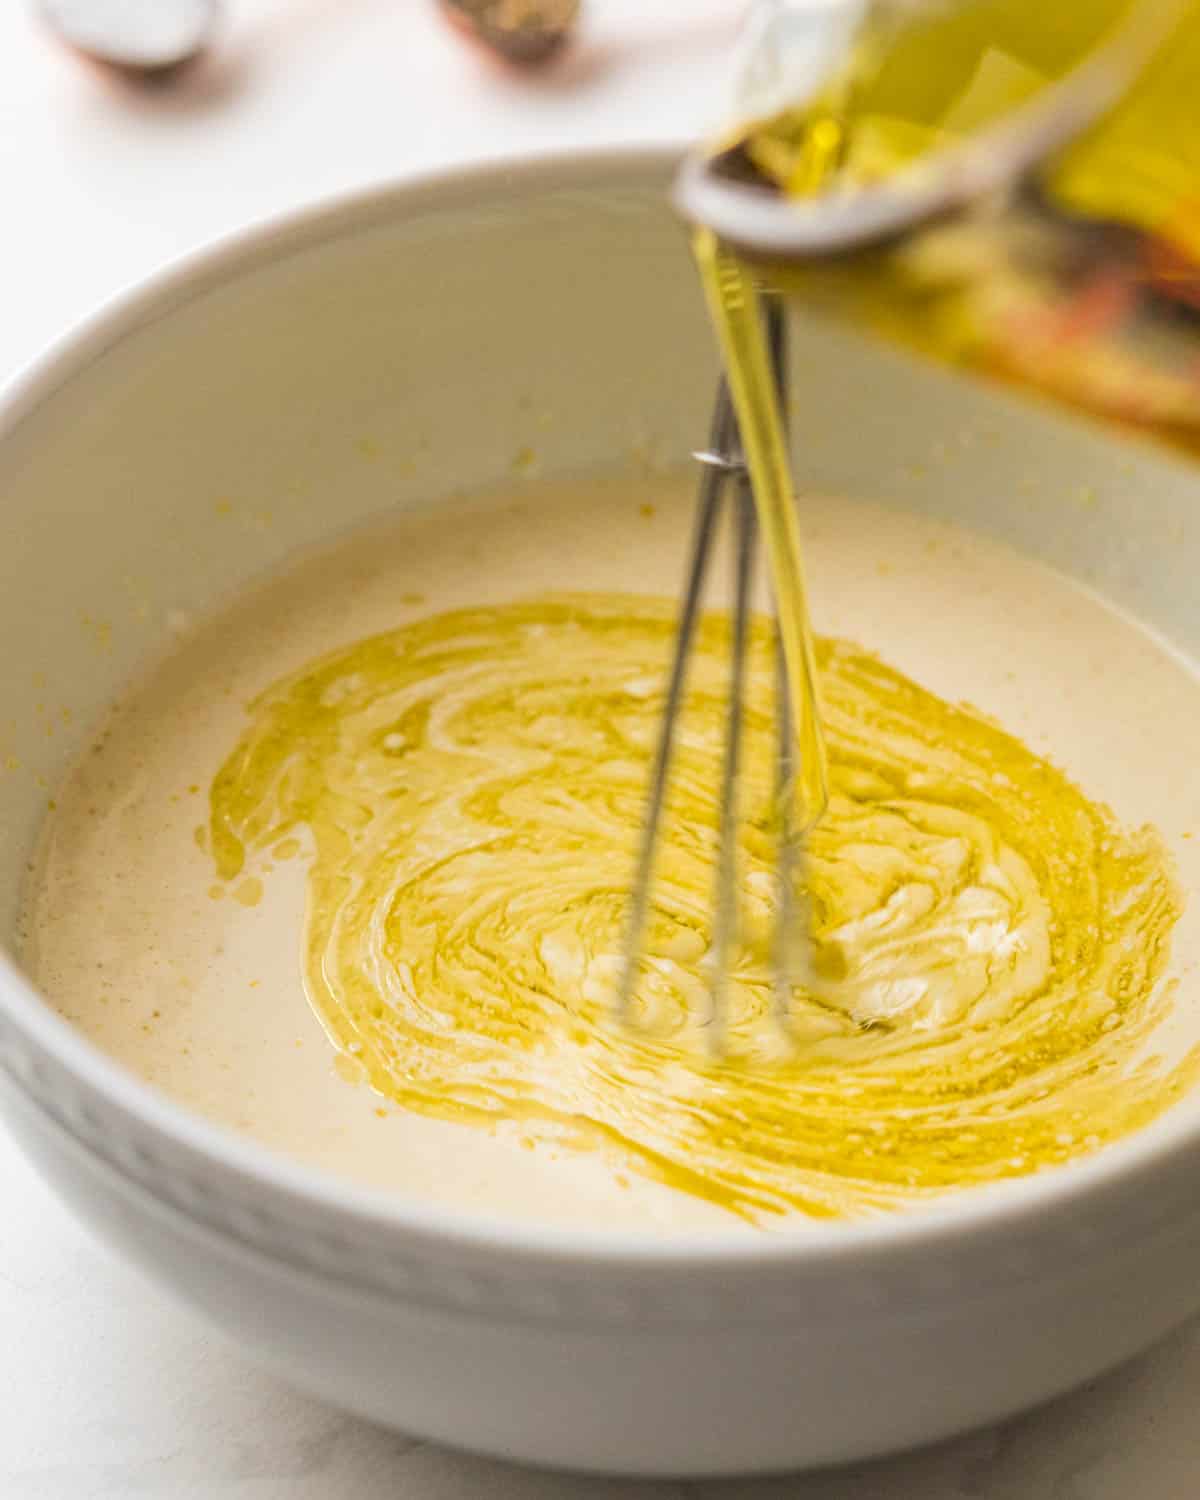 Drizzling in the olive oil to the mayo mixture while whisking.